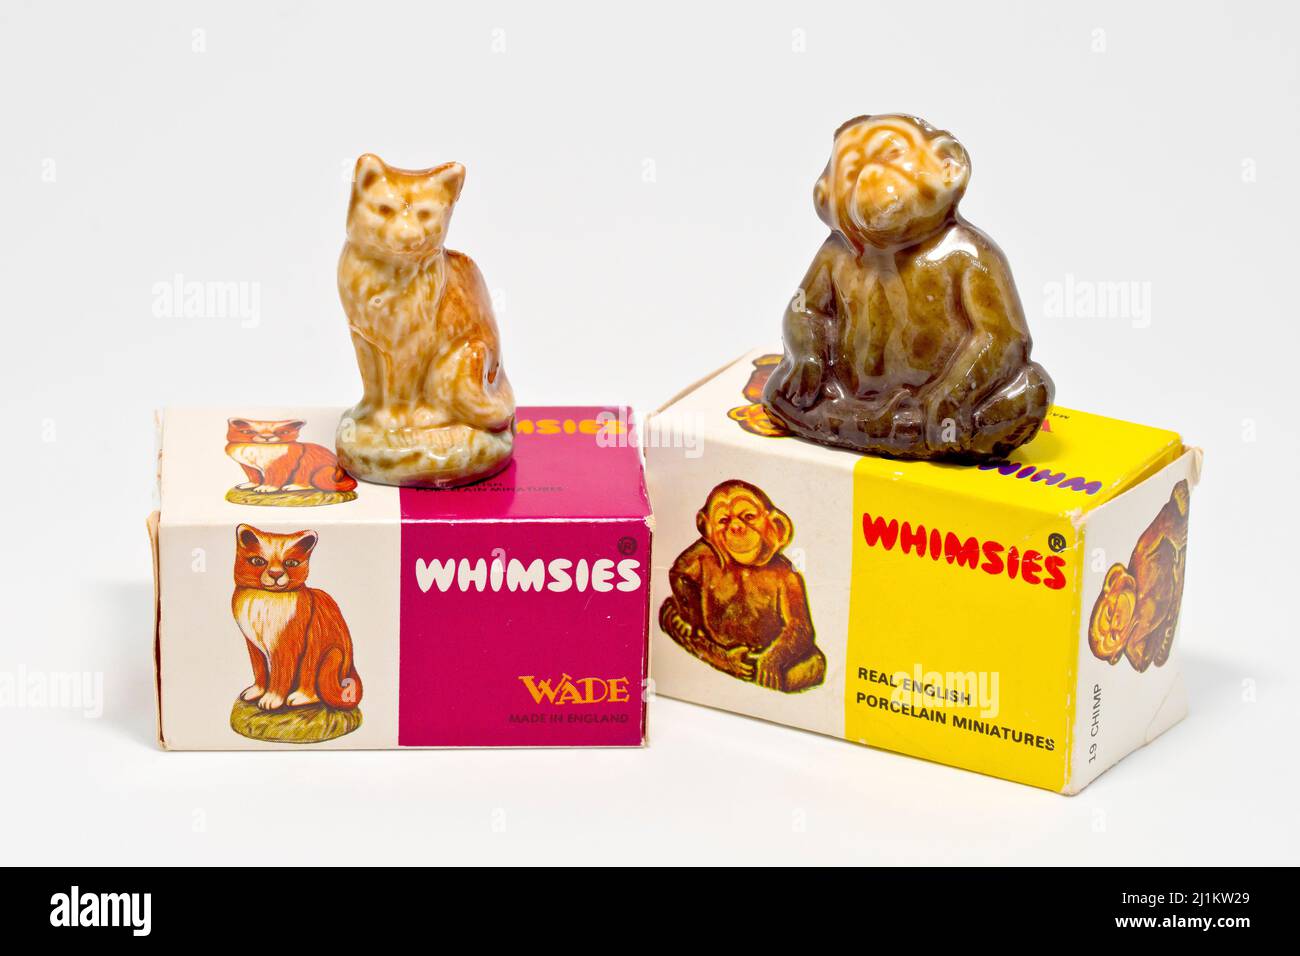 Close up of two Wade Whimsies with boxes, small porcelain animal miniatures popular with collectors since the 1950s, against a white background. Stock Photo